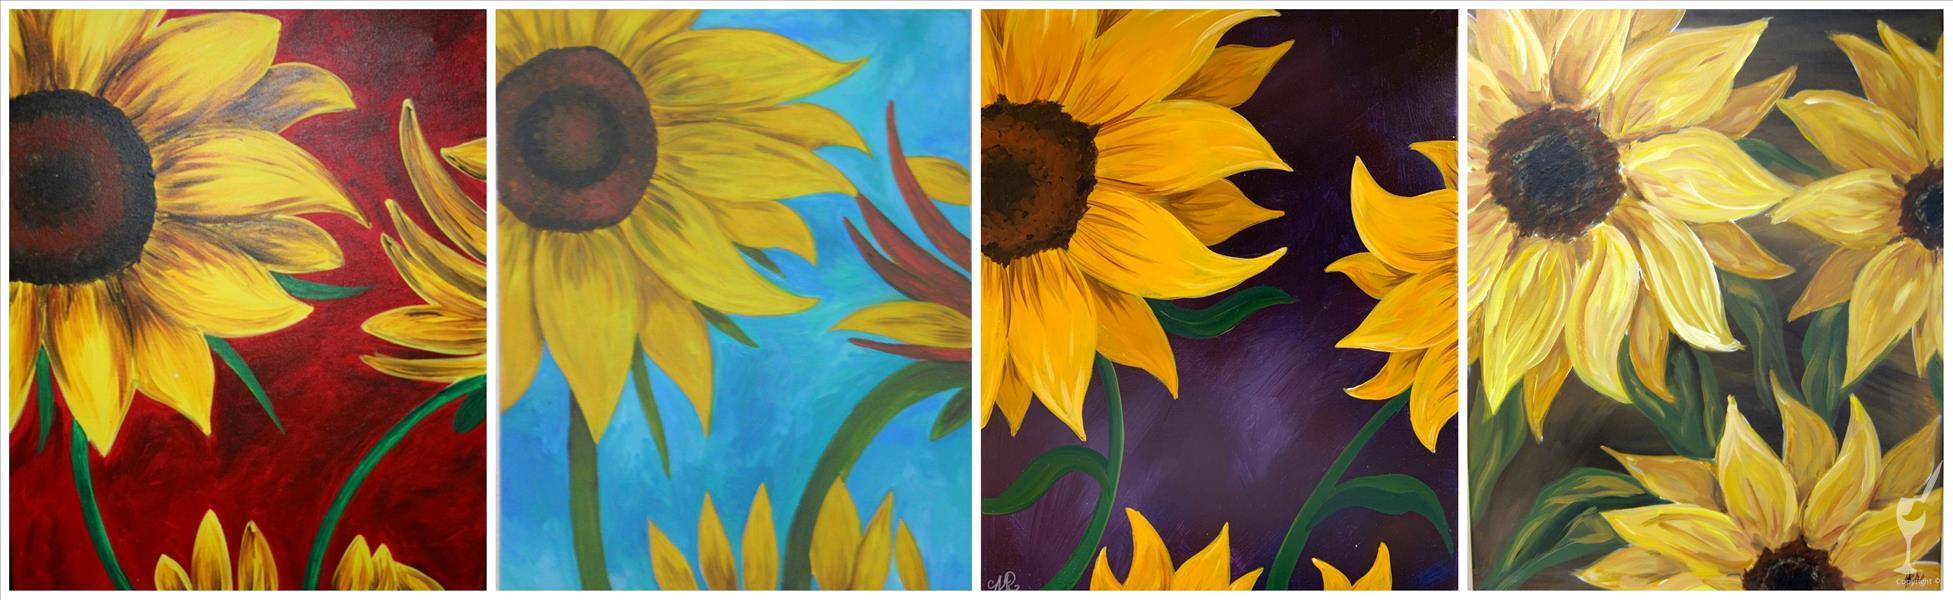 Sunflowers - All Colors YOU Pick!